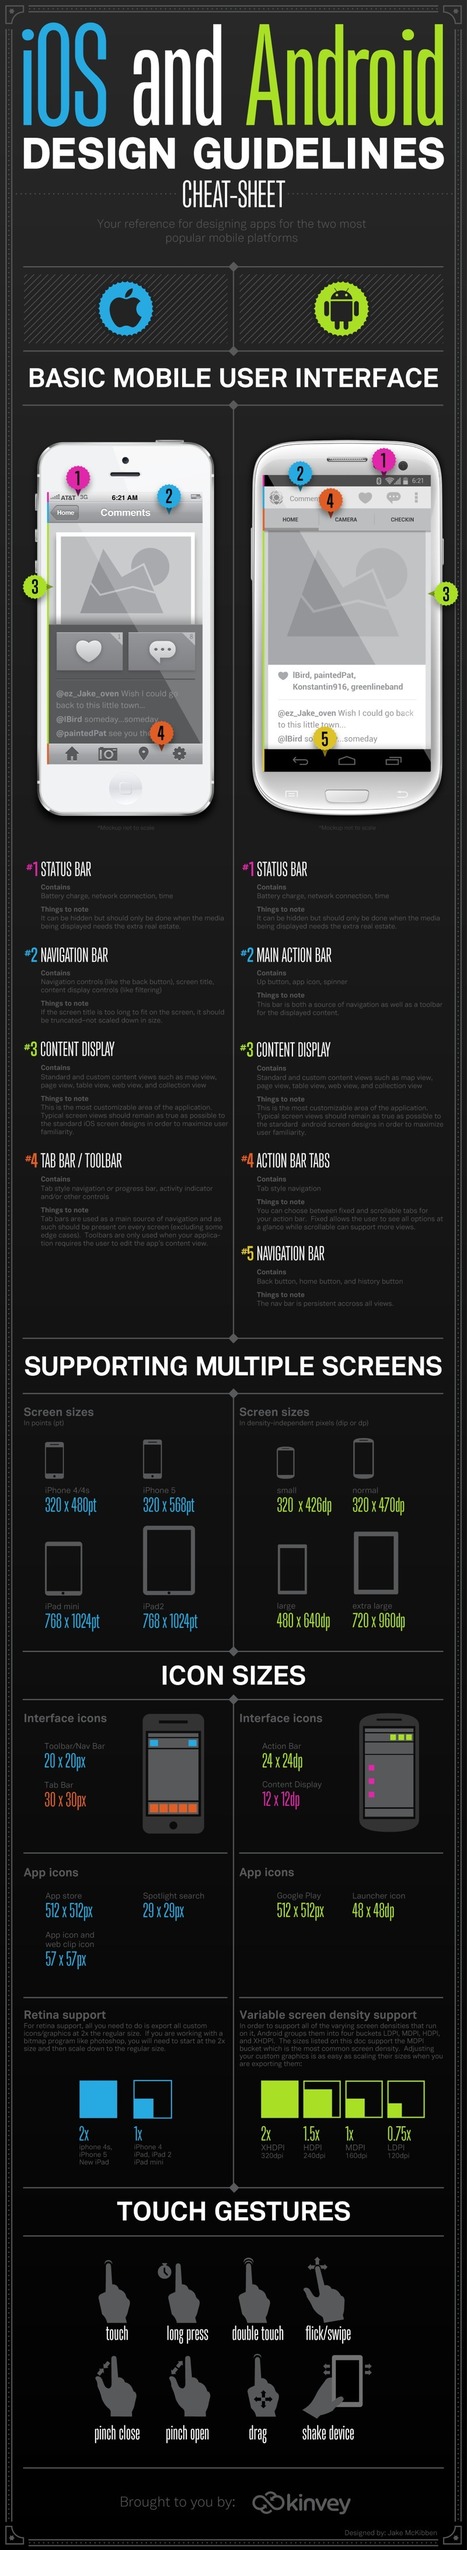 Le guide de conception des applications Android et iOS [infographie] | Time to Learn | Scoop.it